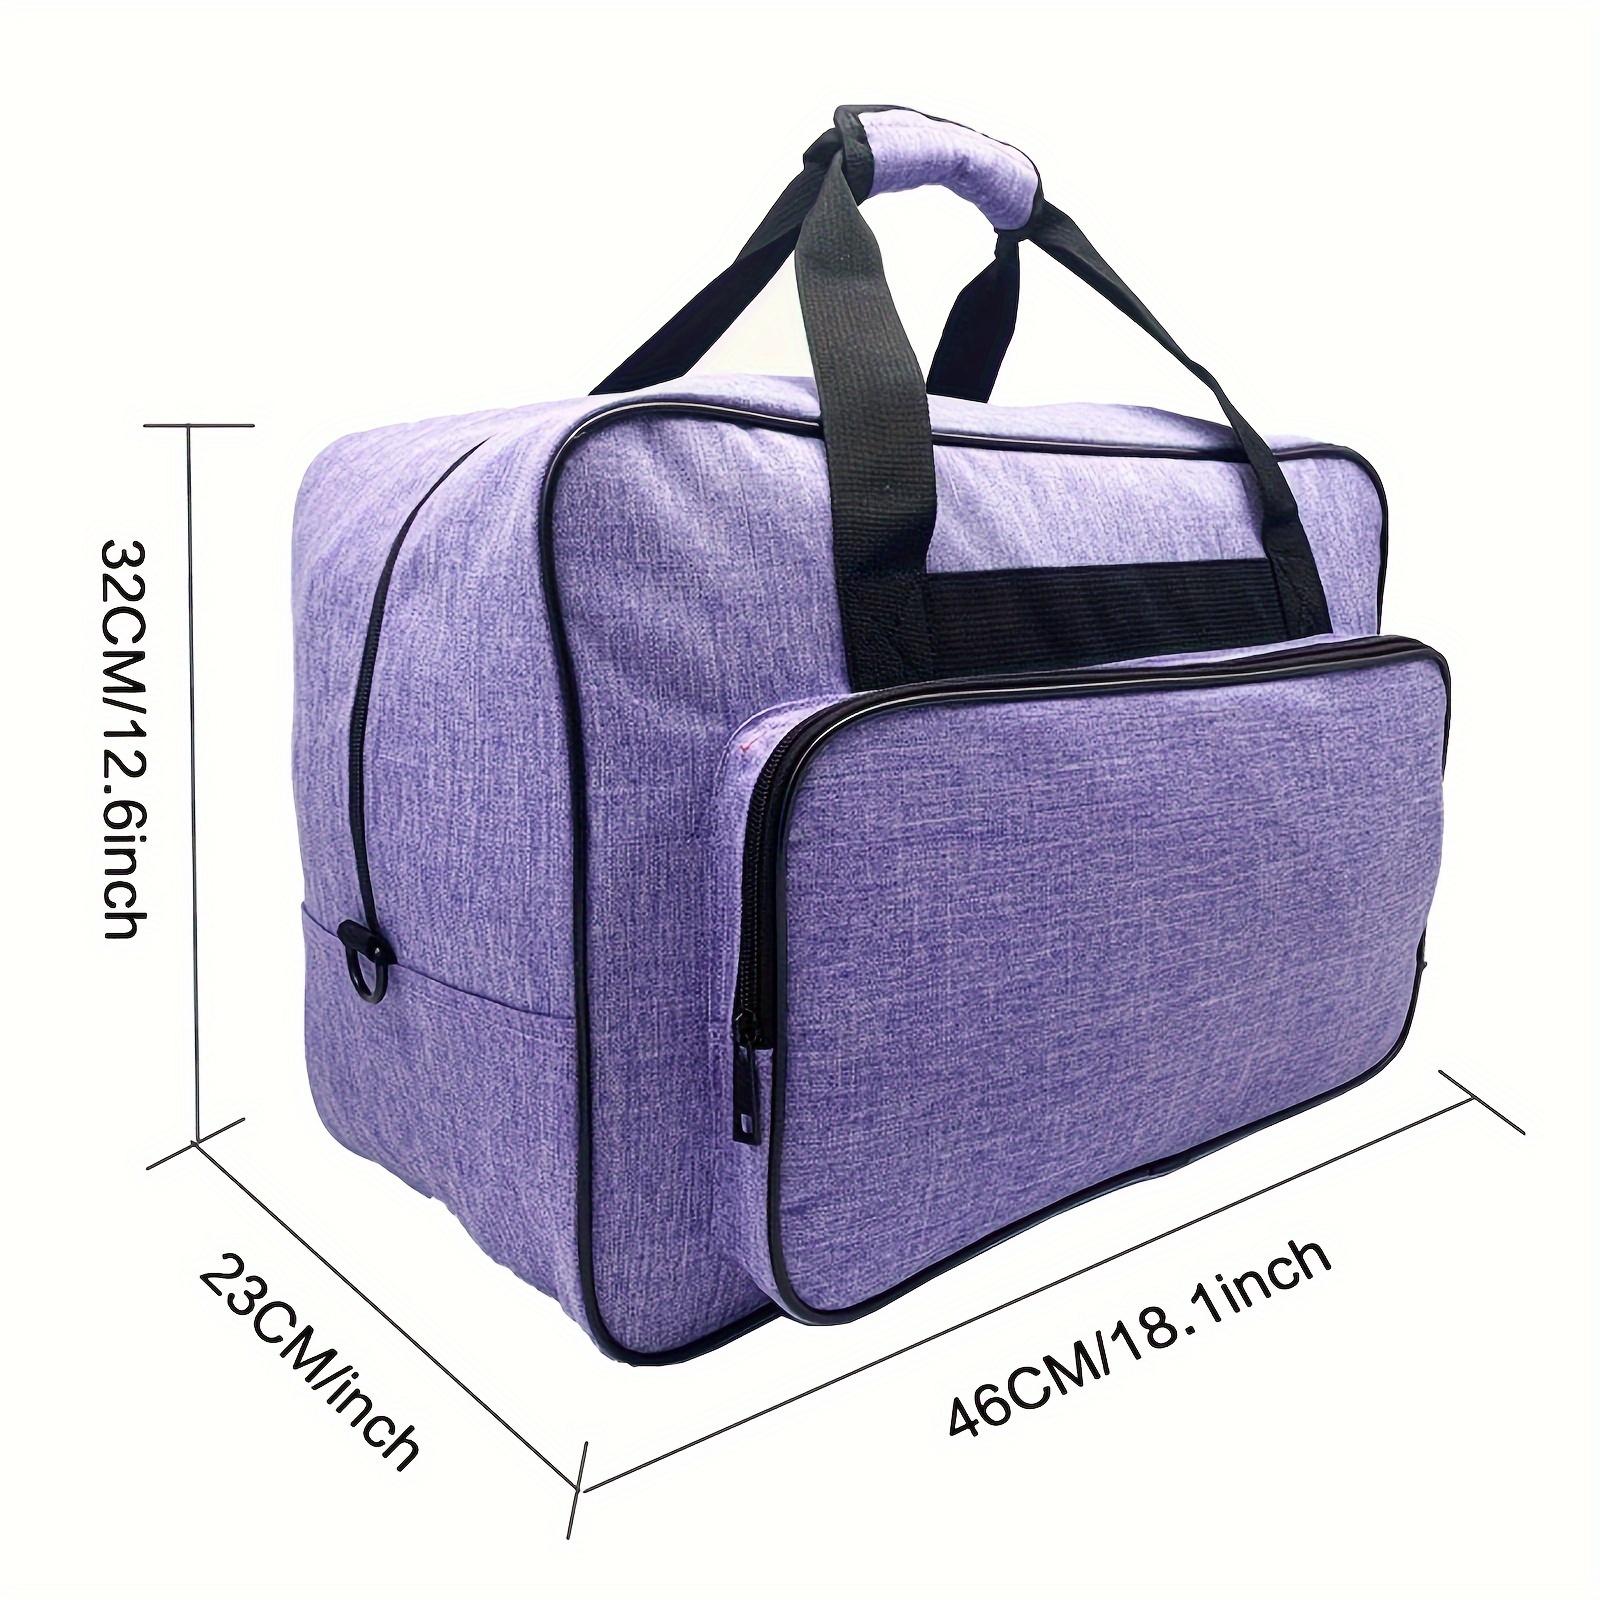 Janome Universal Carrying Case & Reviews